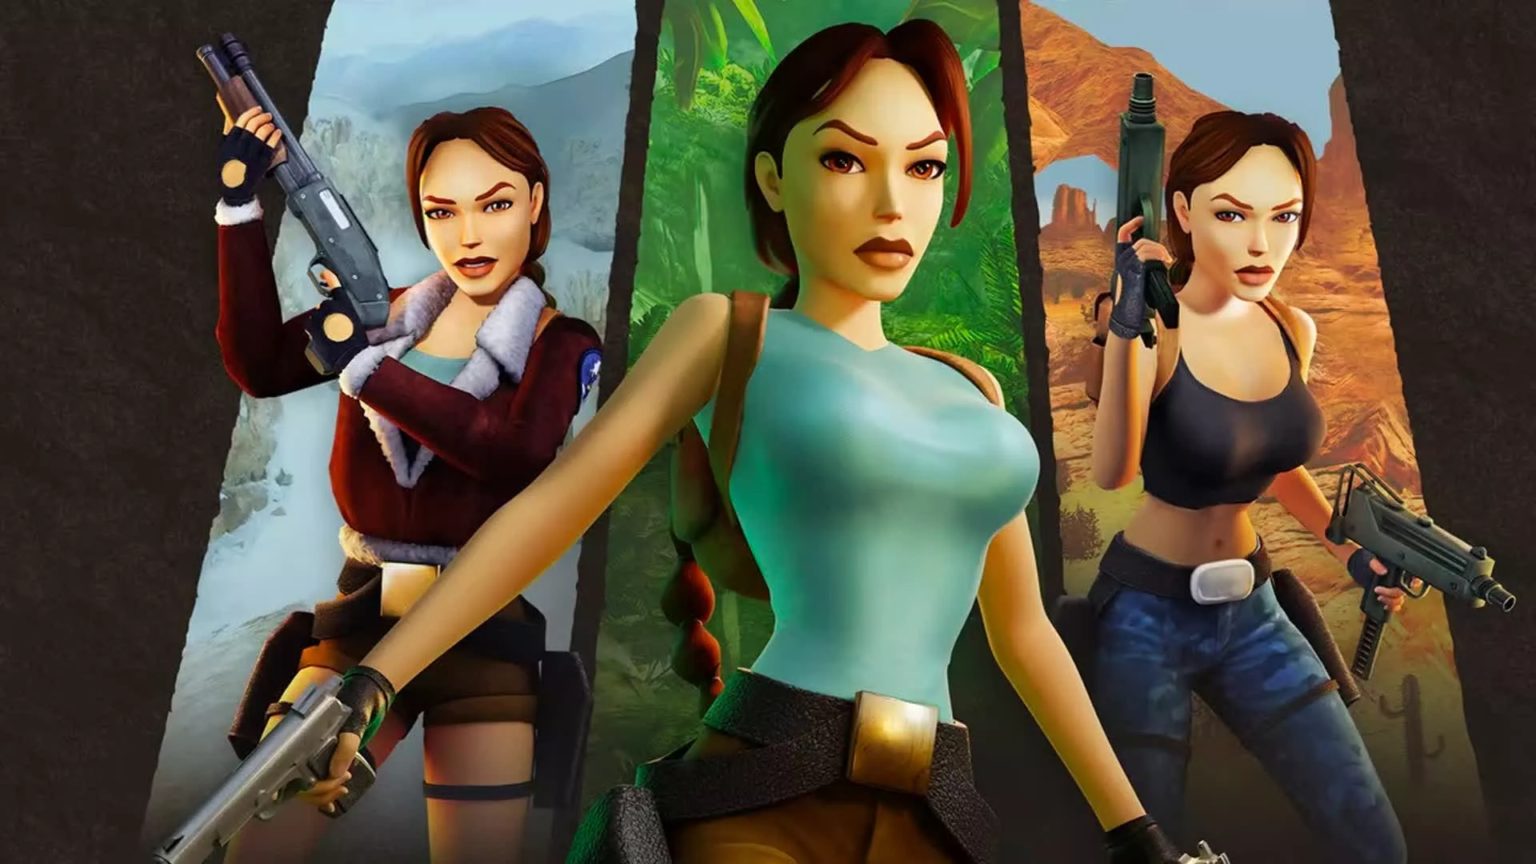 Within hours of the Tomb Raider Remaster launch, someone already posted a Nude Raider mod